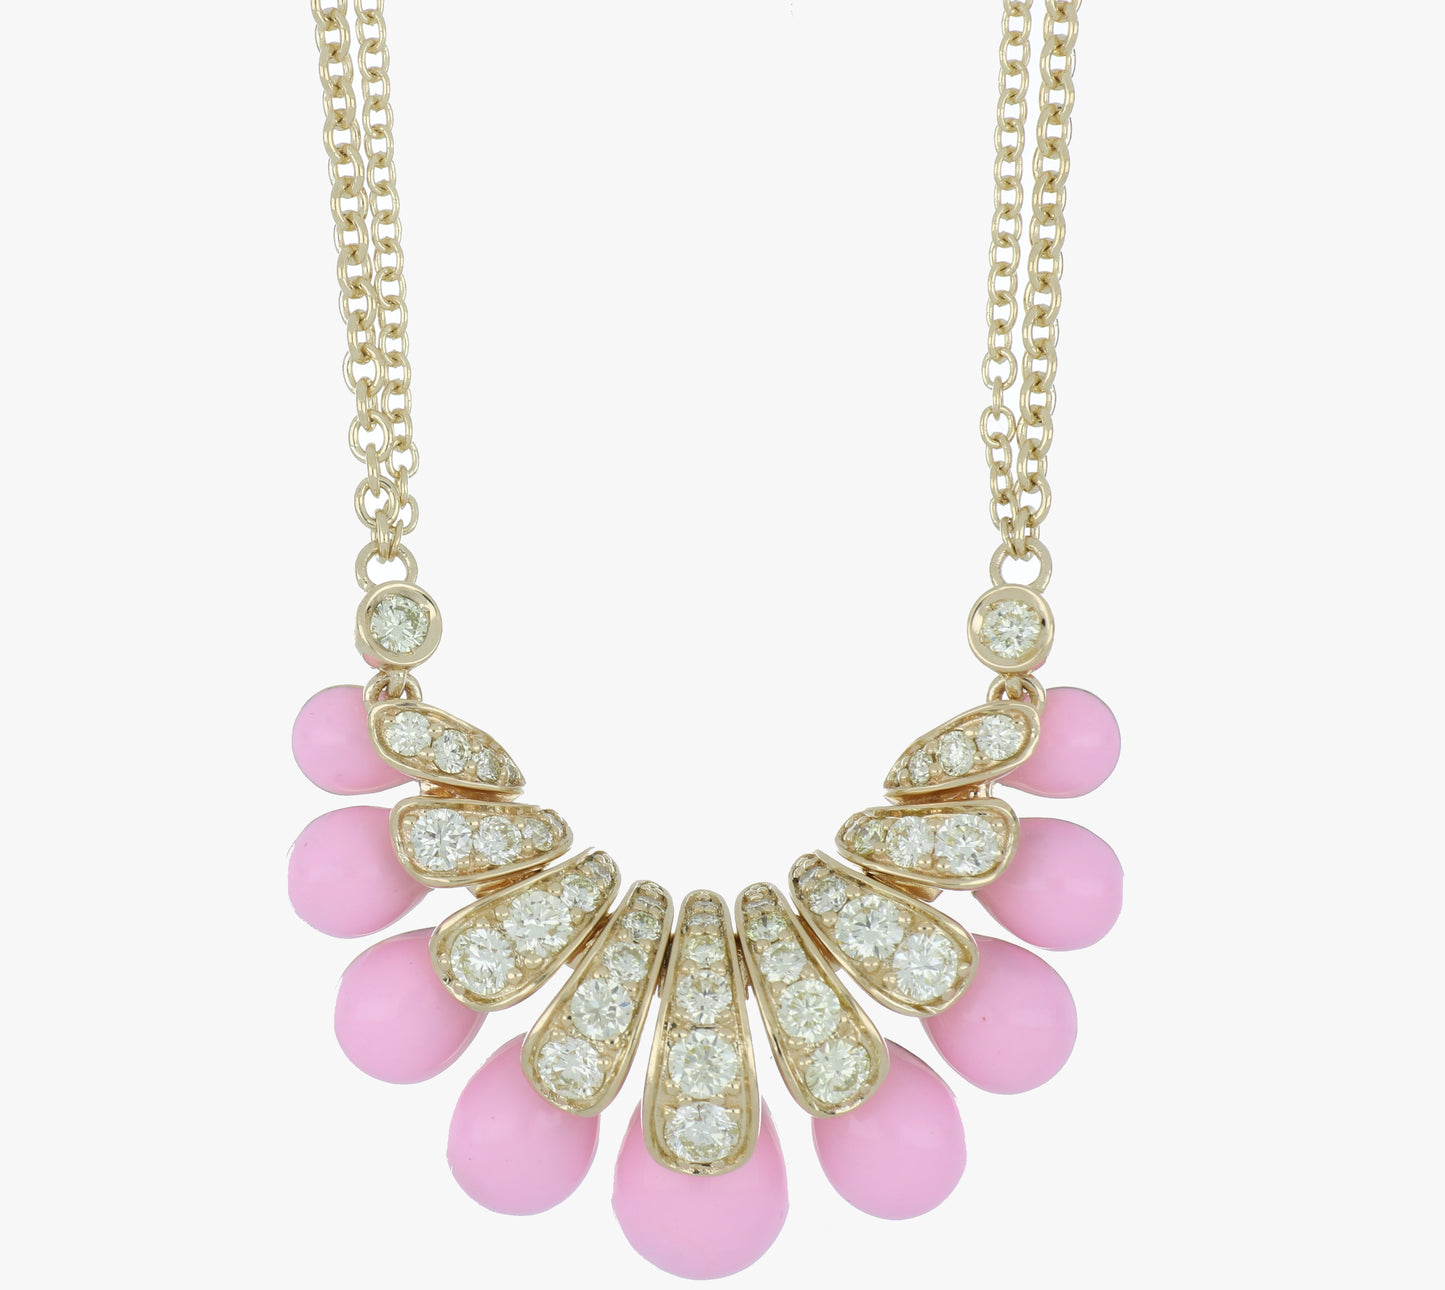 Gold diamond and pink enamel necklace